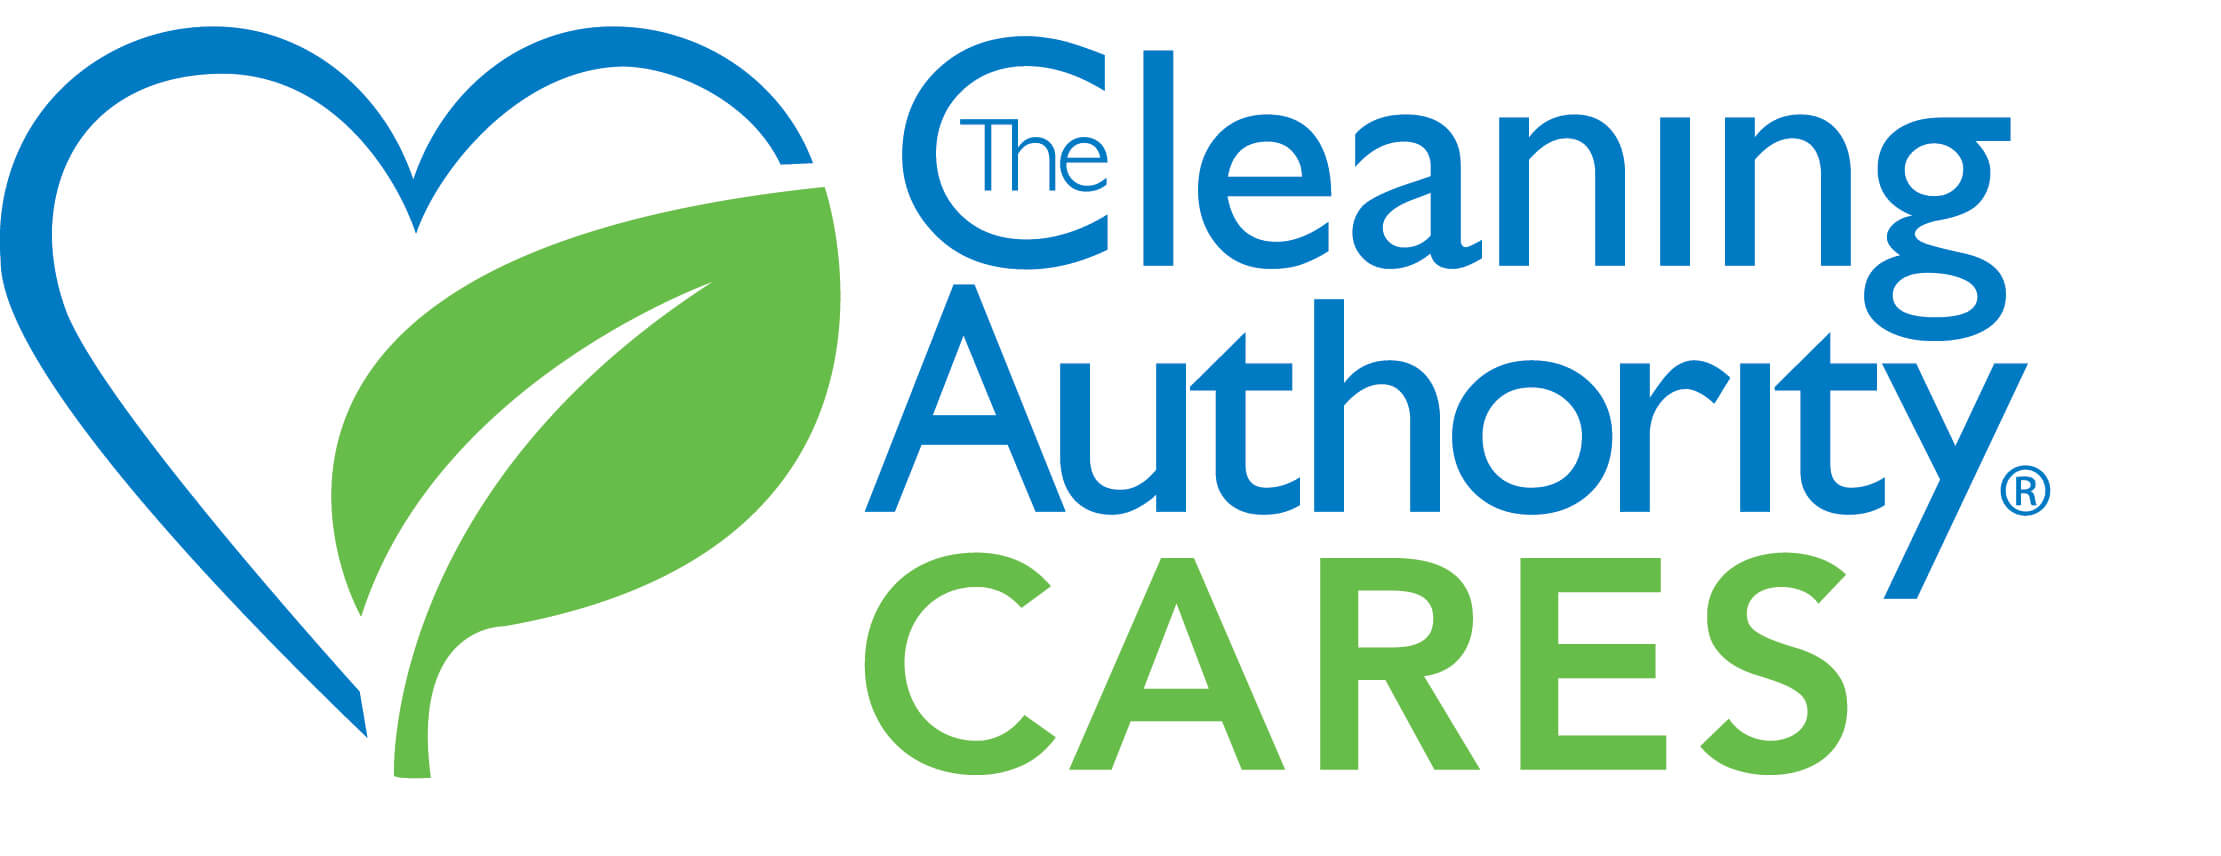 A logo with a blue heart and a green leaf. Text reads: "The Cleaning Authority Cares."